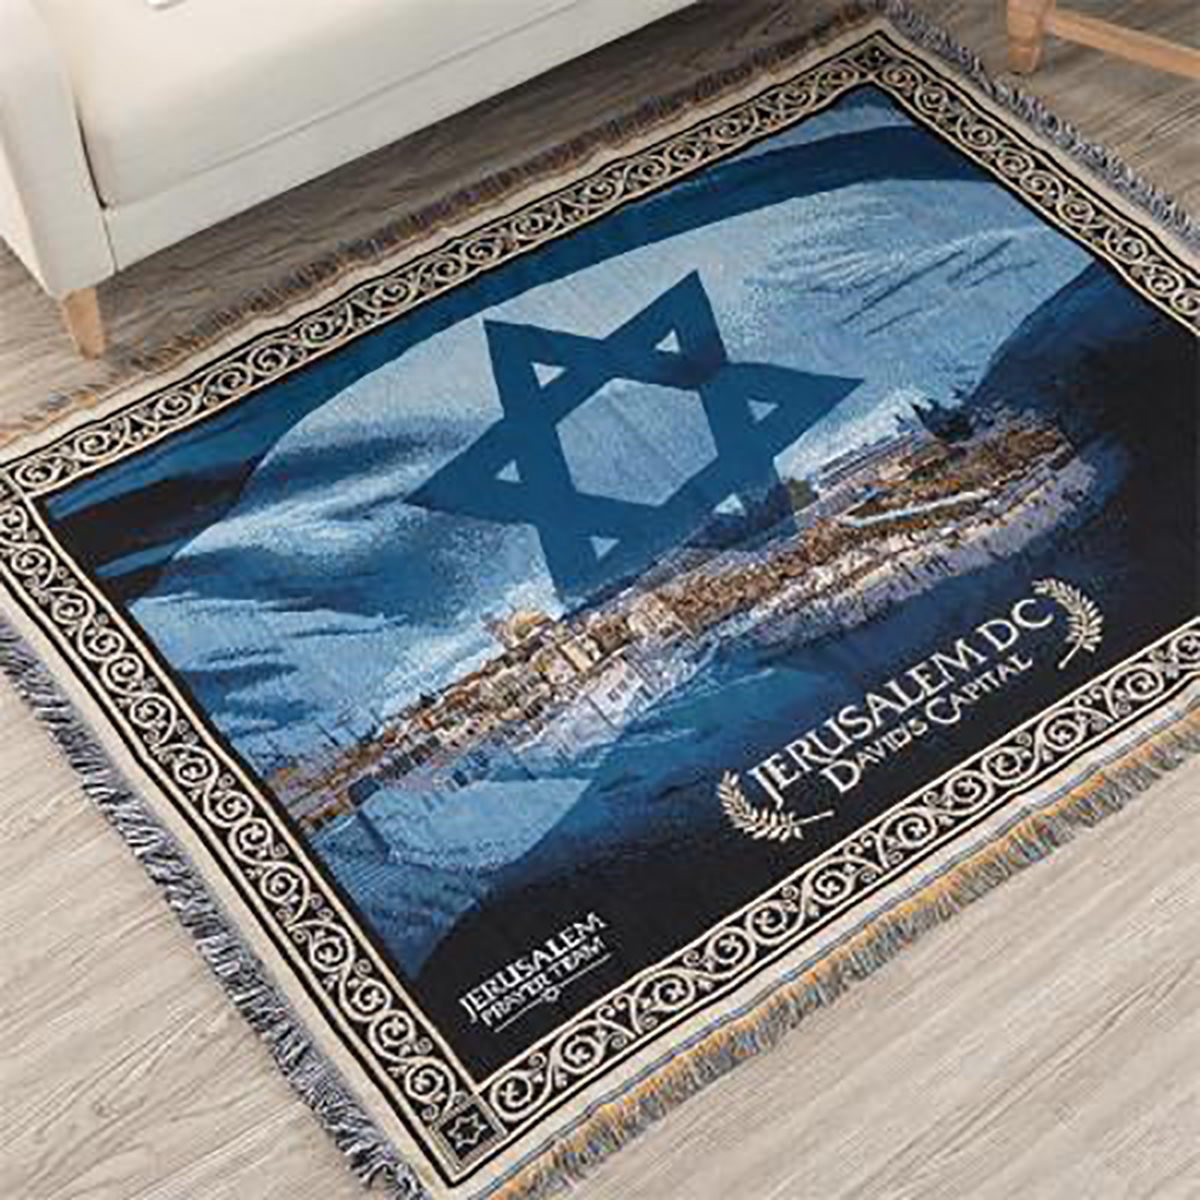 Folding-Decorative-Blanket-Knit-Tapestry-Prayer-Carpet-Middle-East-Sofa-Towel-for-Home-Textiles-1761320-3